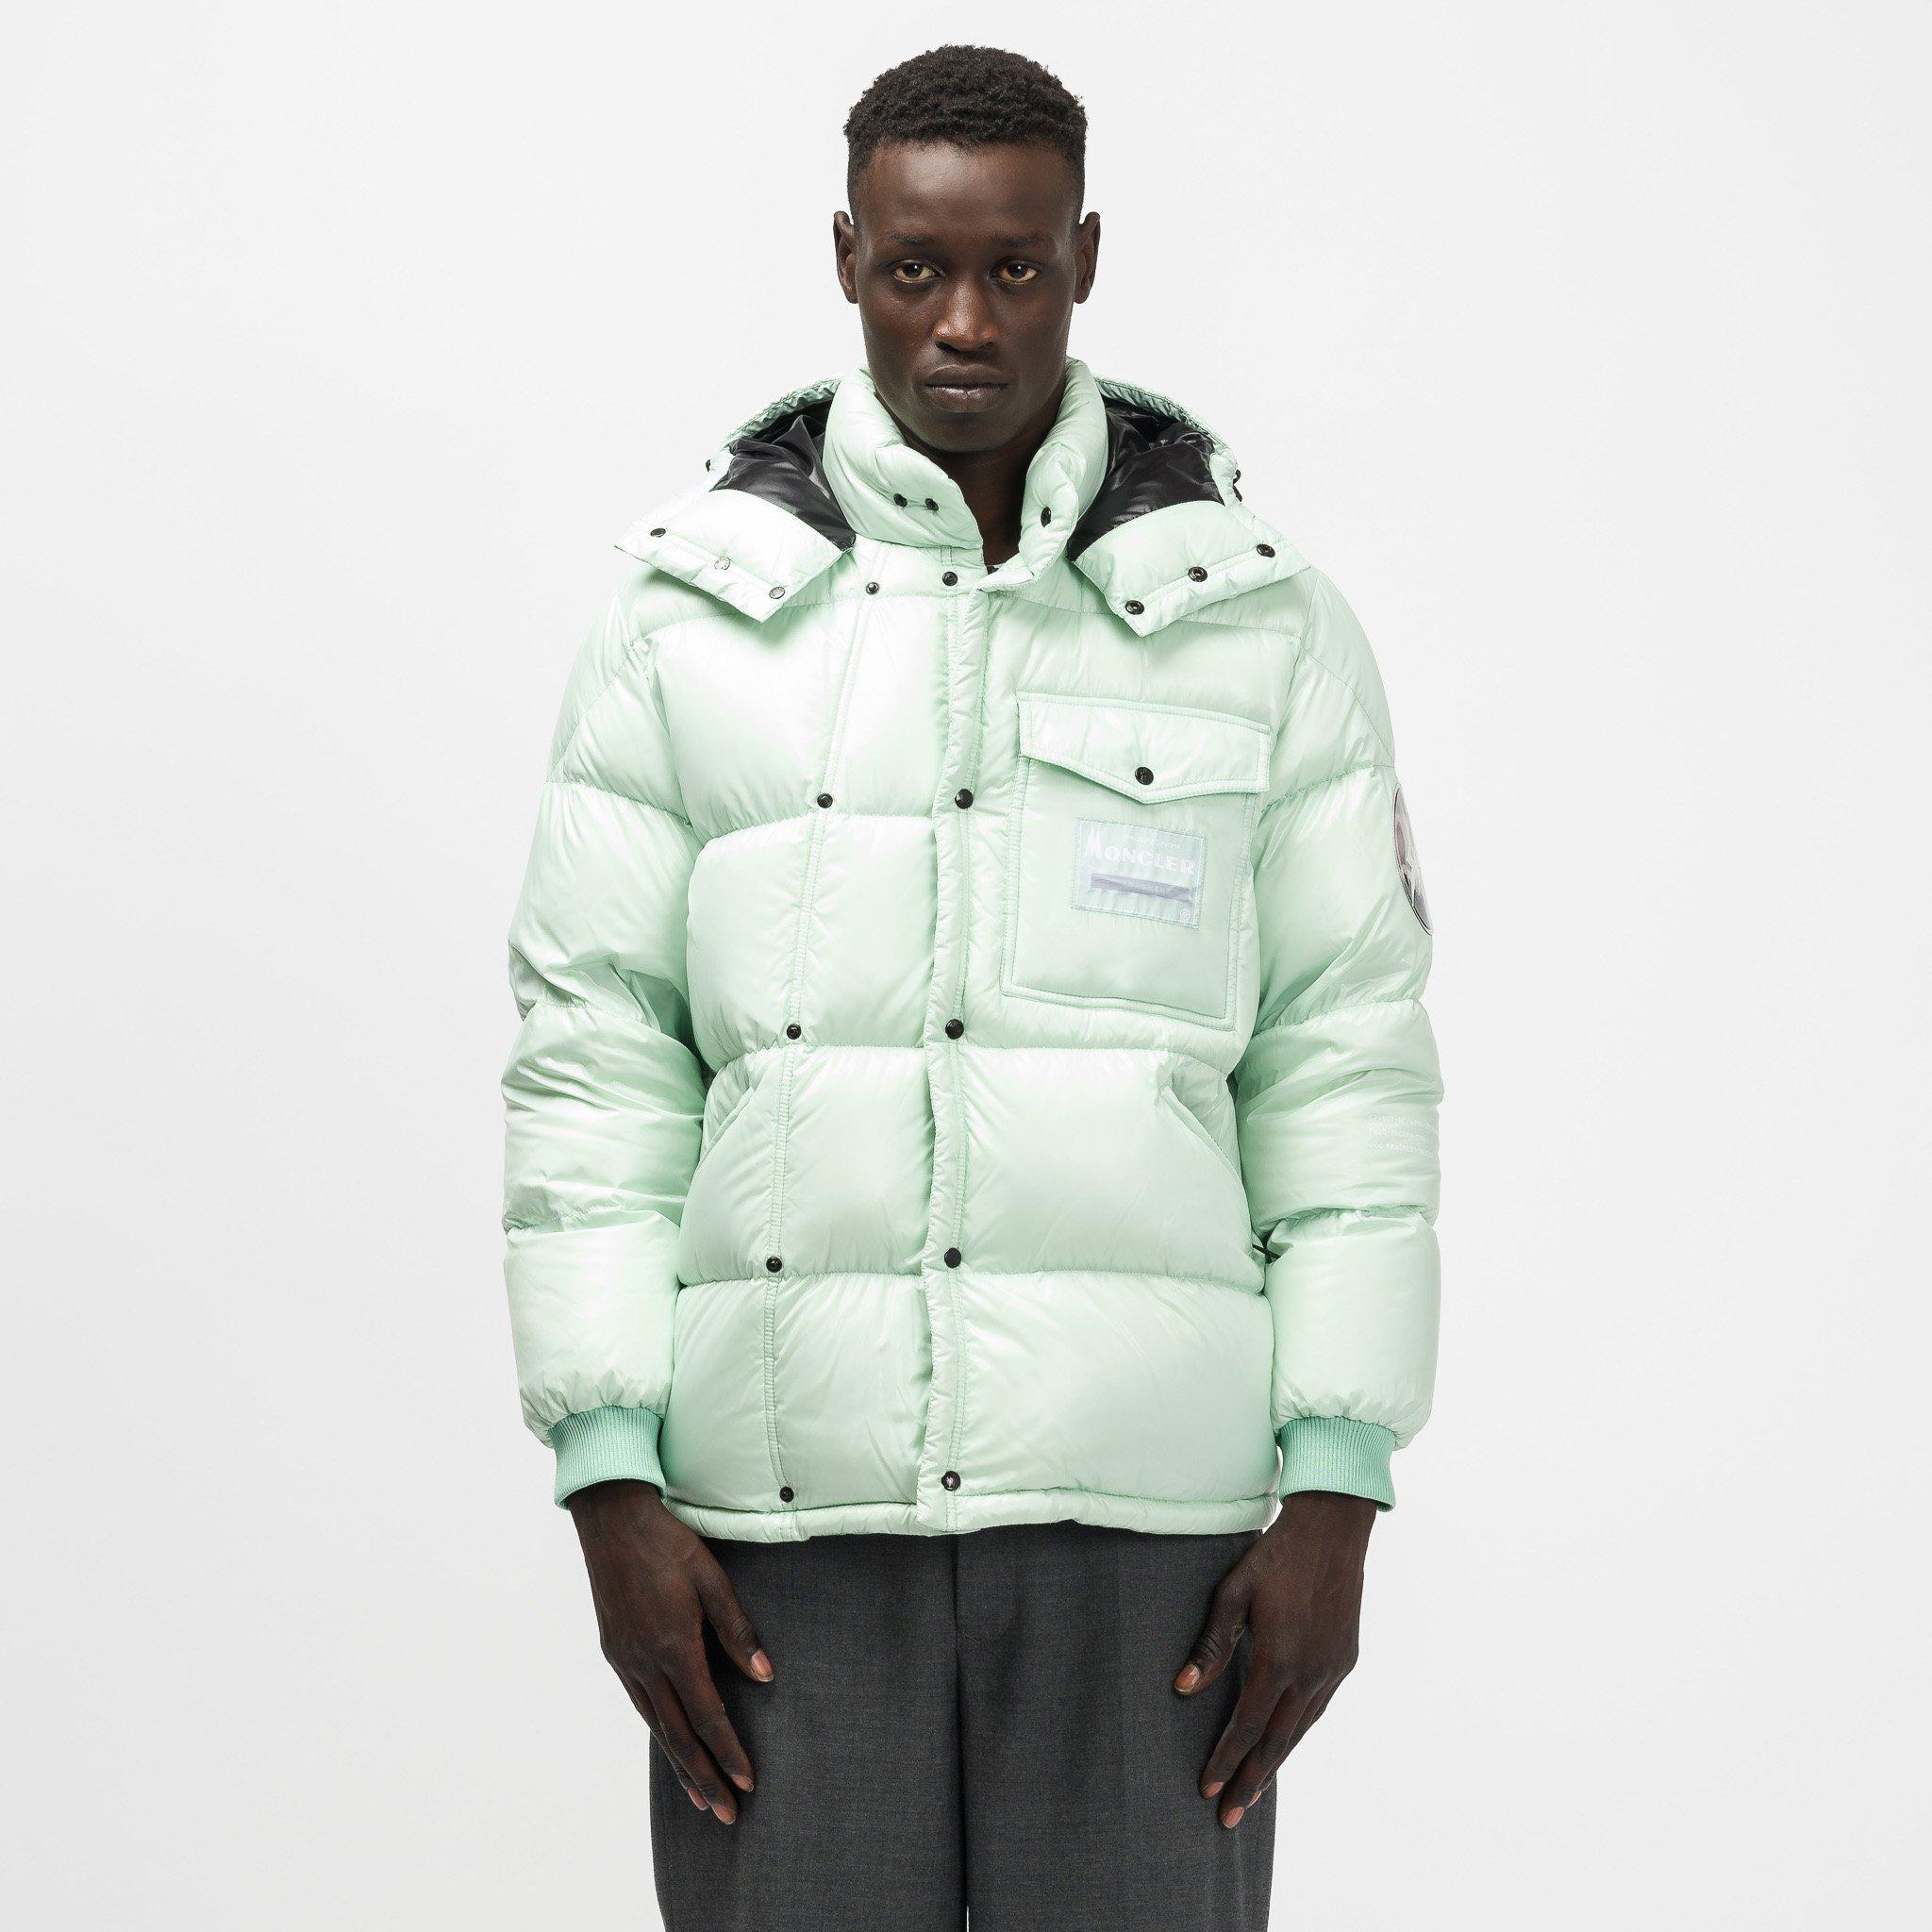 Moncler Genius Synthetic Fragment Anthemy Bomber in Bright Green 